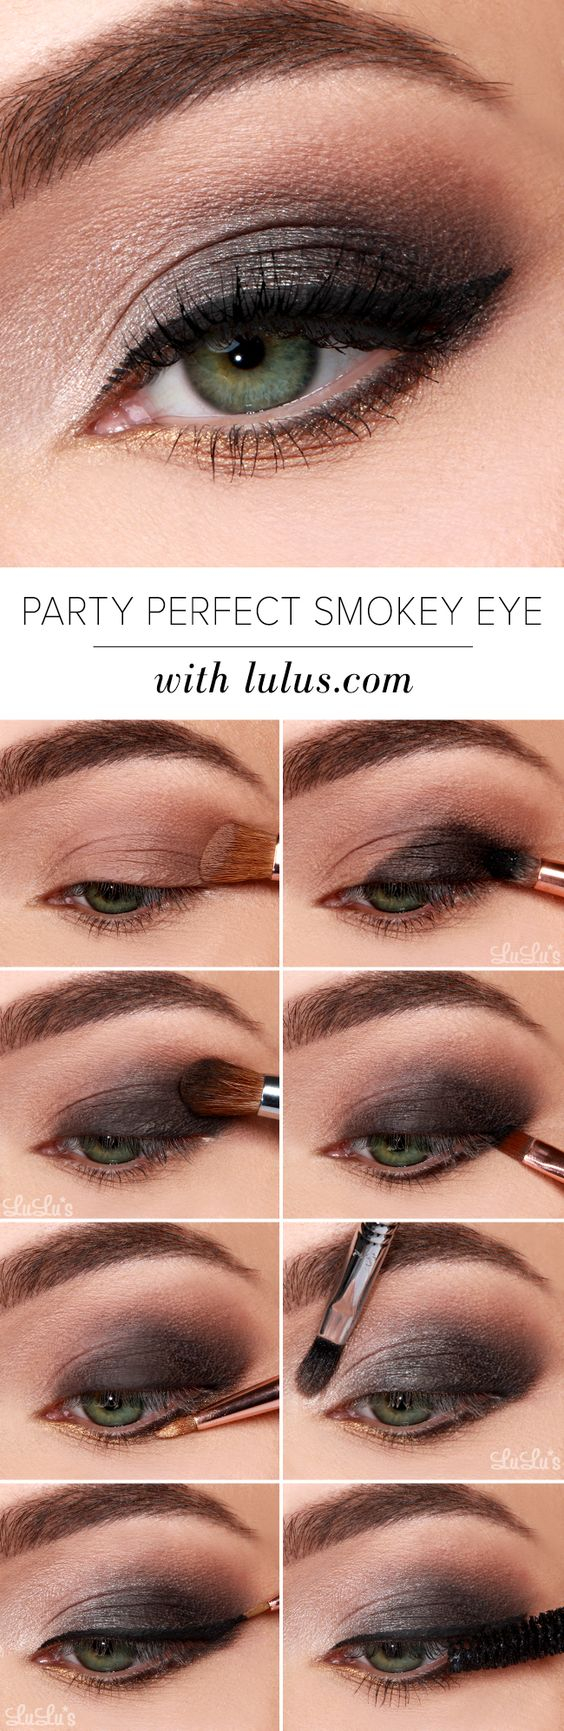 Step By Step Smokey Eye Makeup For Blue Eyes 40 Hottest Smokey Eye Makeup Ideas 2019 Smokey Eye Tutorials For